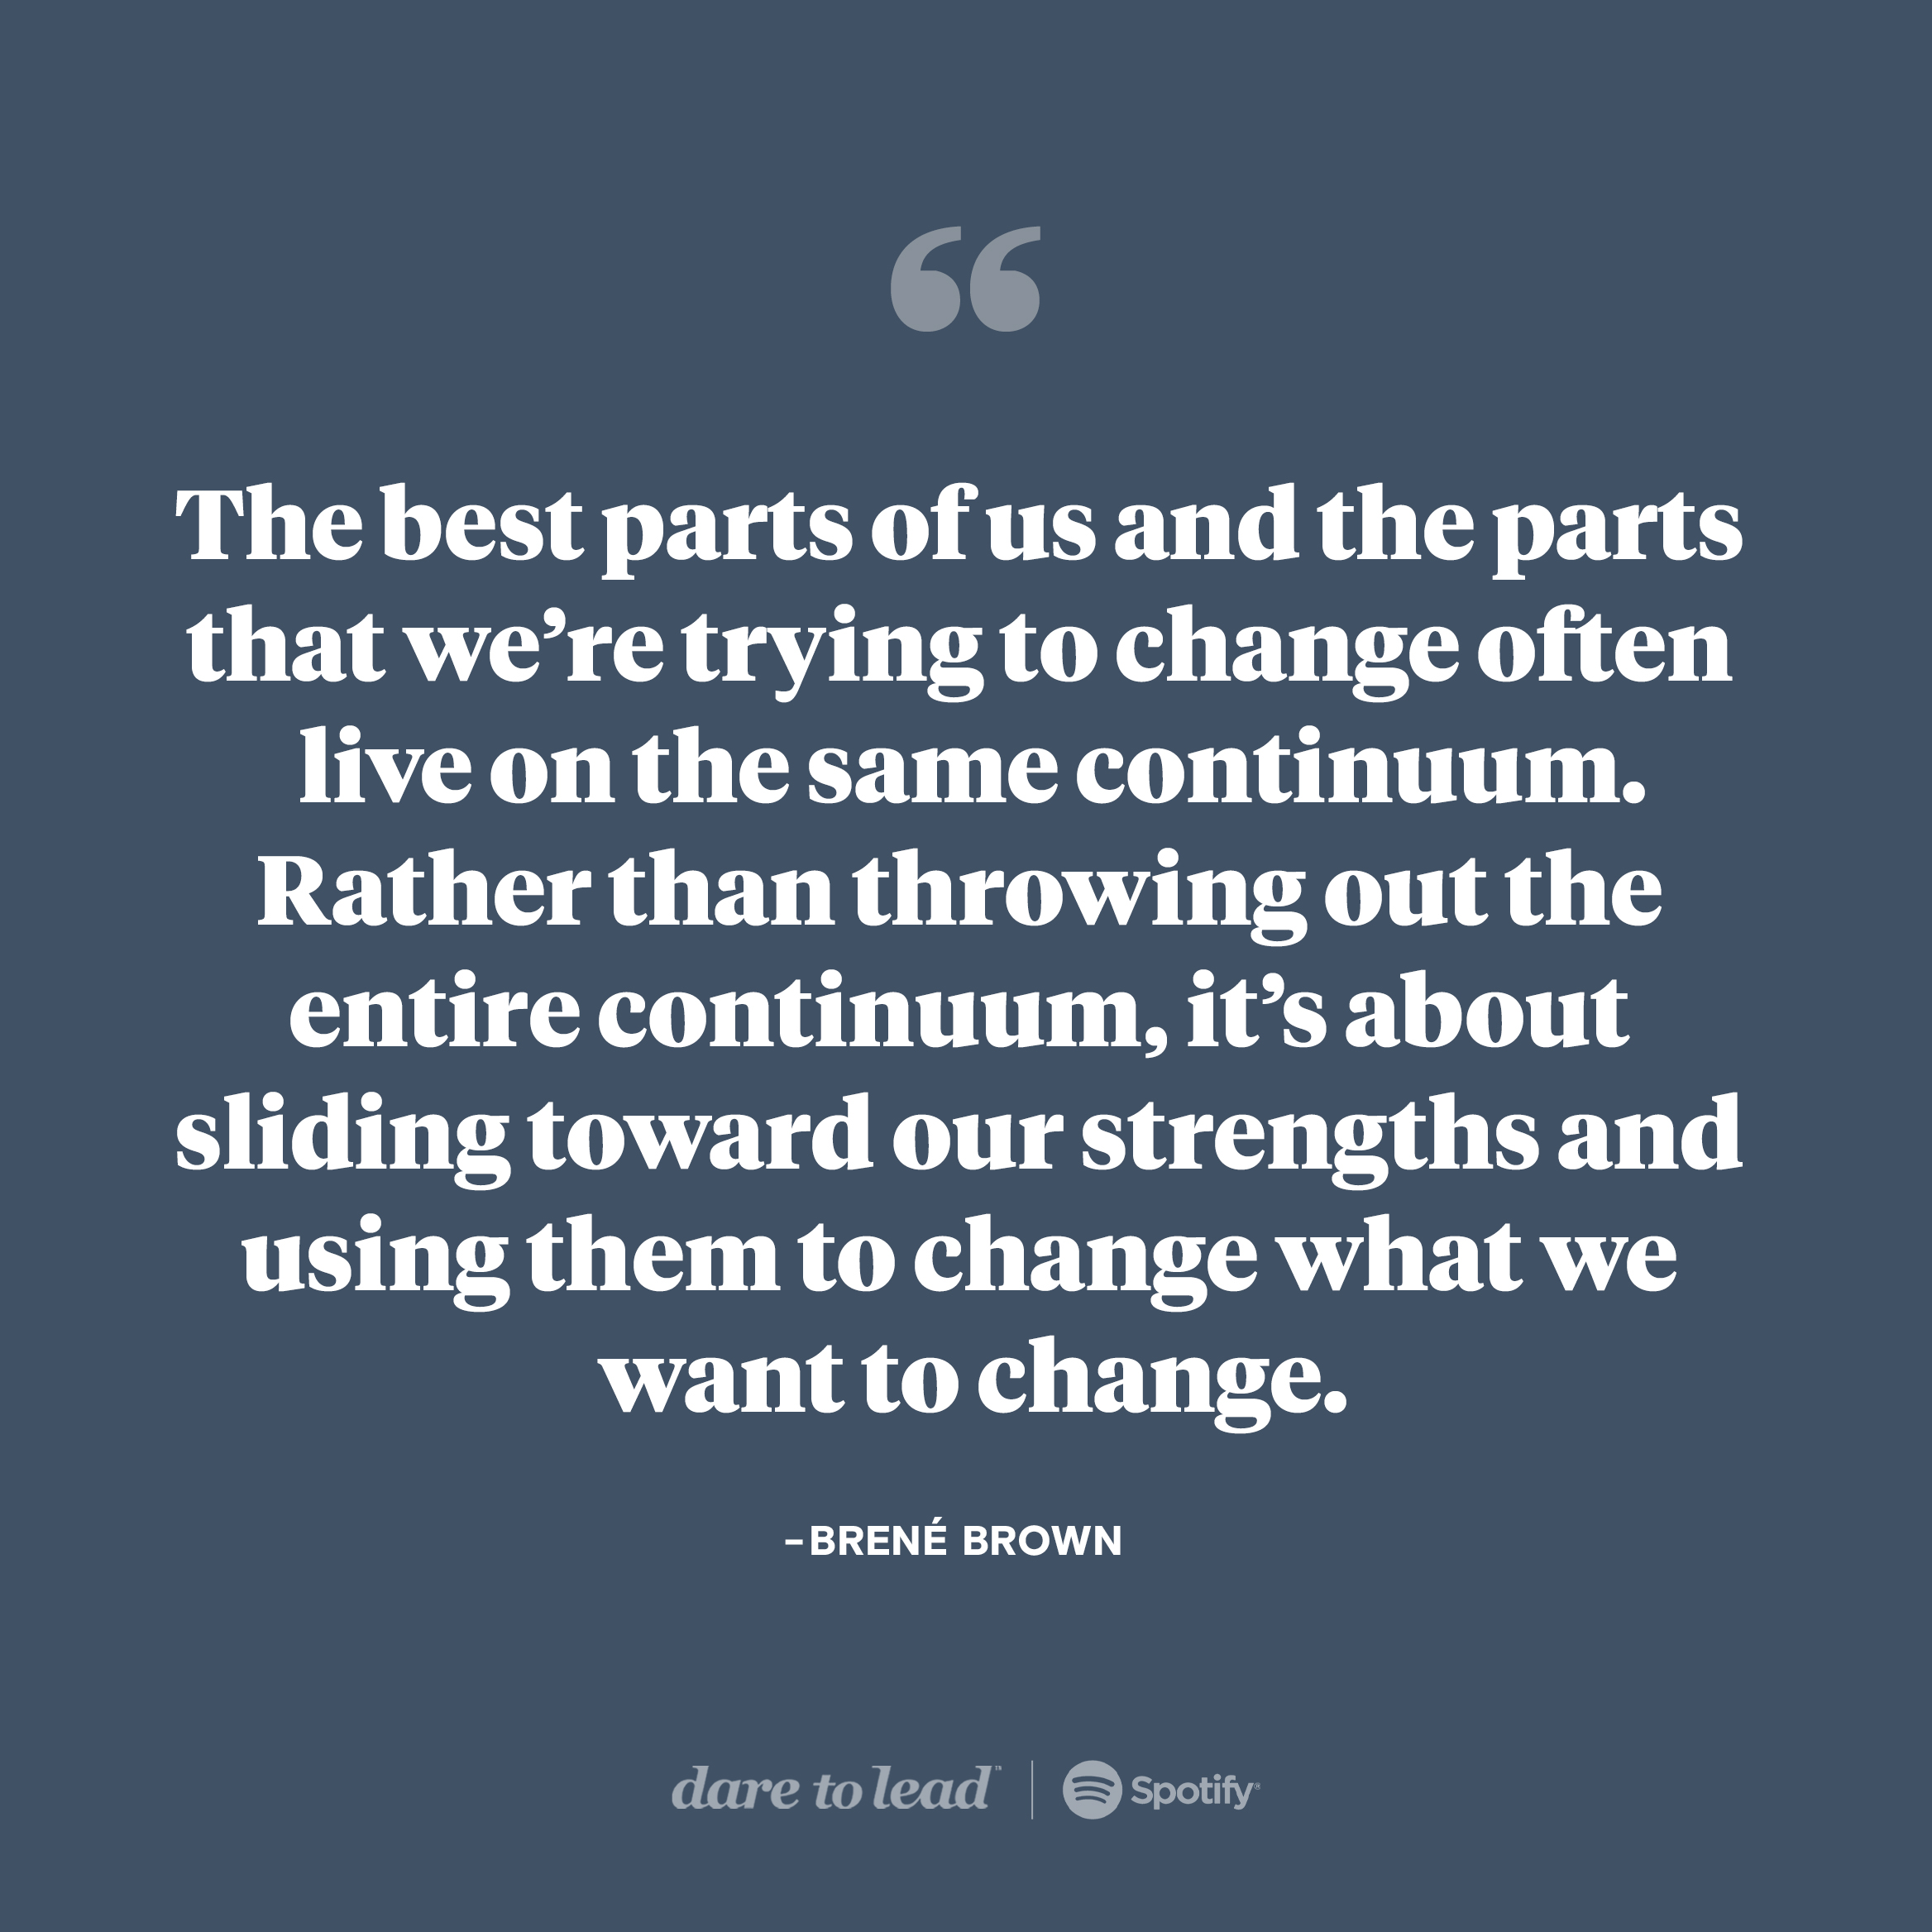 The best parts of us and the parts that we're trying to change often live on the same continuum. Rather than throwing out the entire continuum, it's about sliding toward our strengths and using hem to change what we want to change. — Brene Brown. Listen to the latest Dare to Lead episode on Spotify